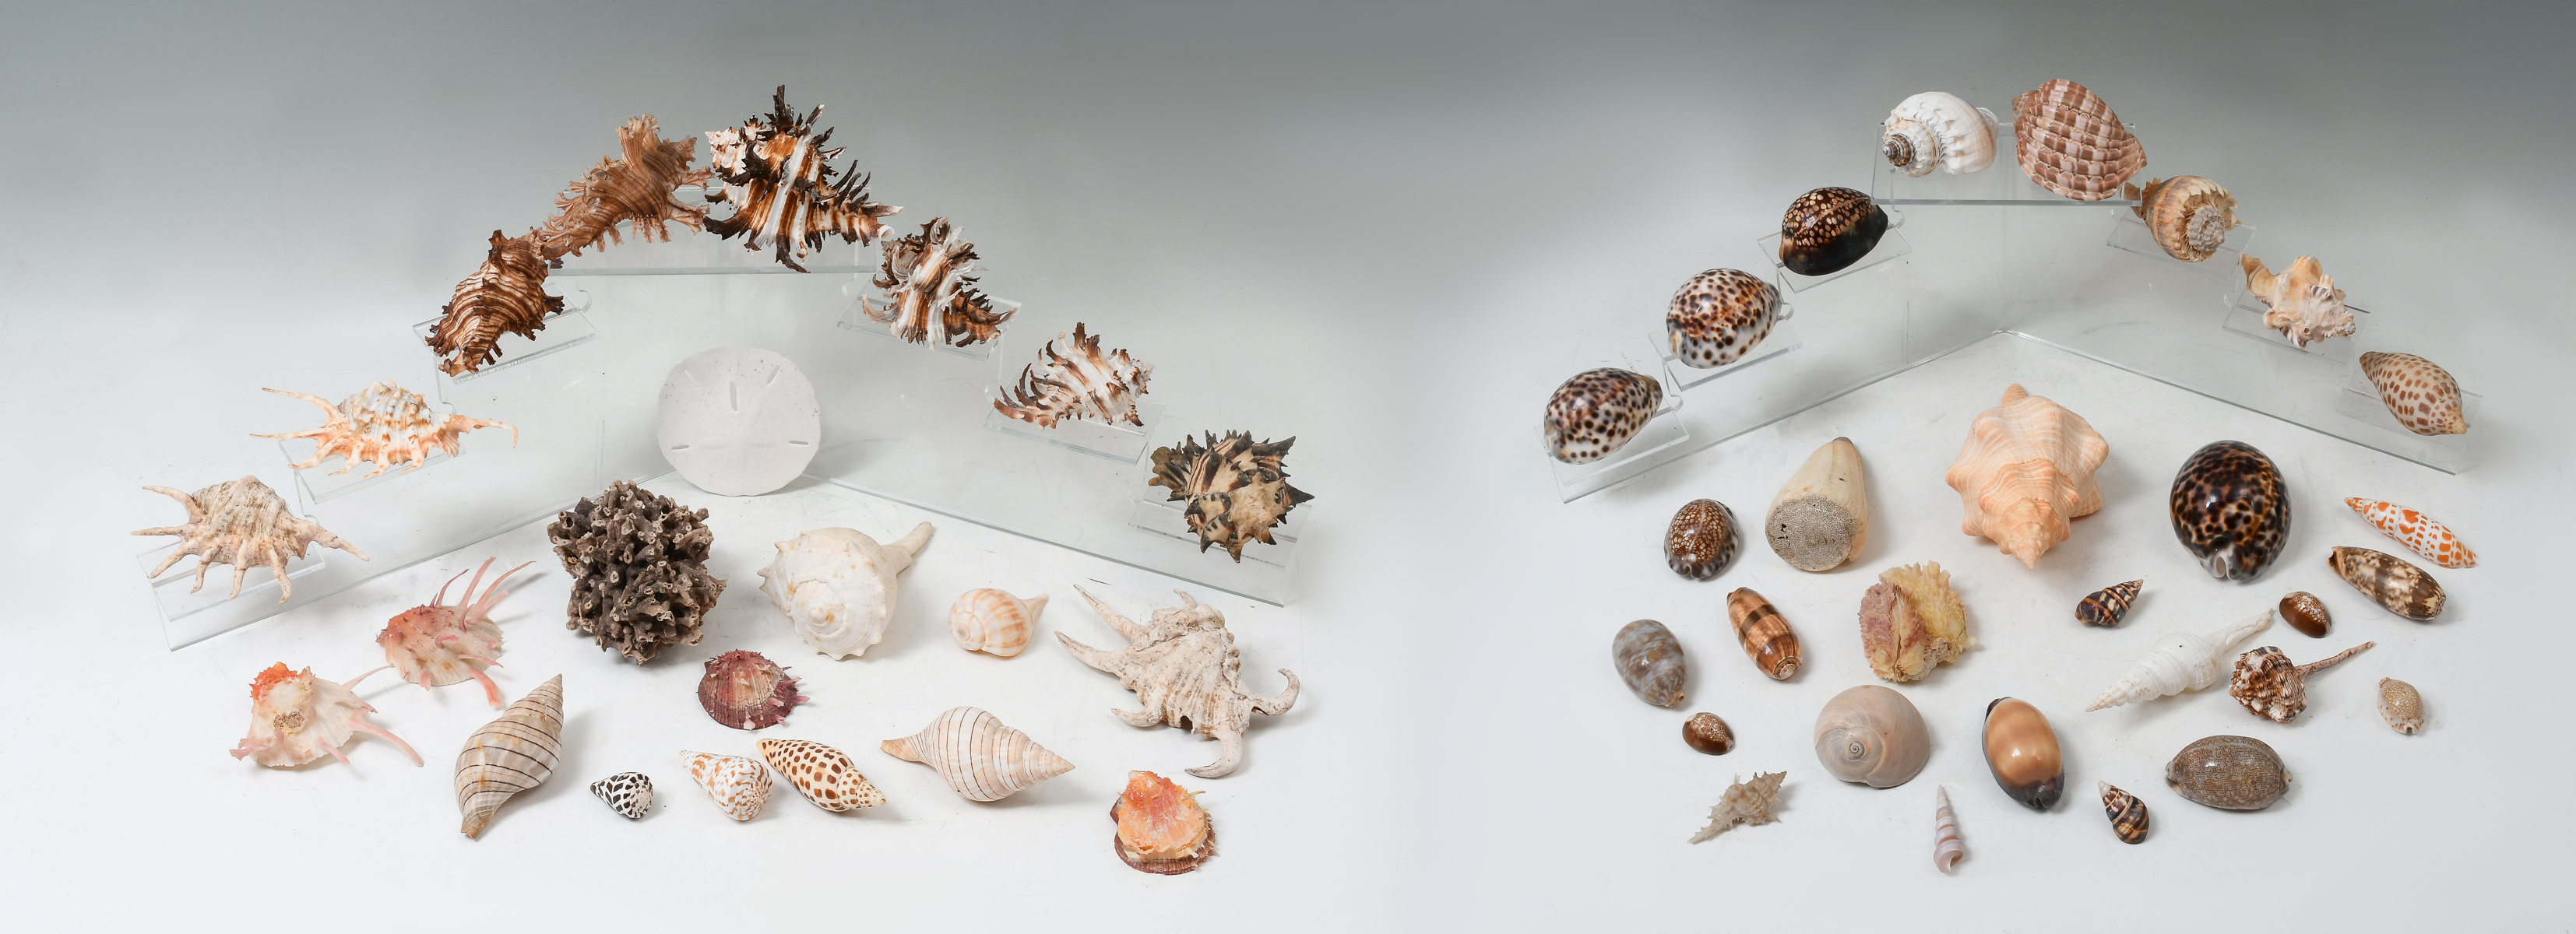 EXOTIC SEASHELL COLLECTION Comprising  2758b2